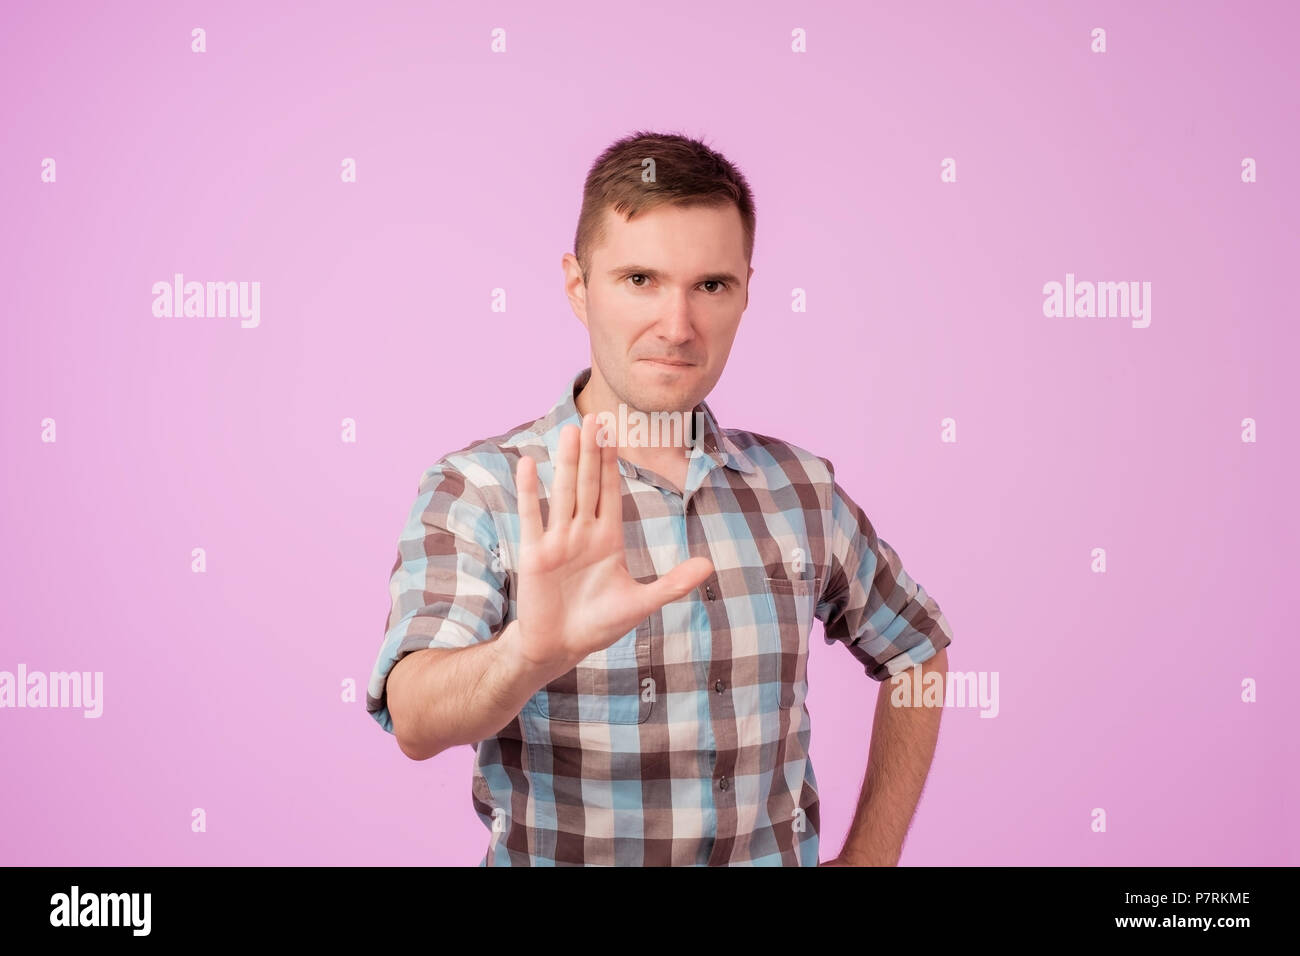 Portrait of european serious young man stretching hand towards camera with stop or hold gesture Stock Photo